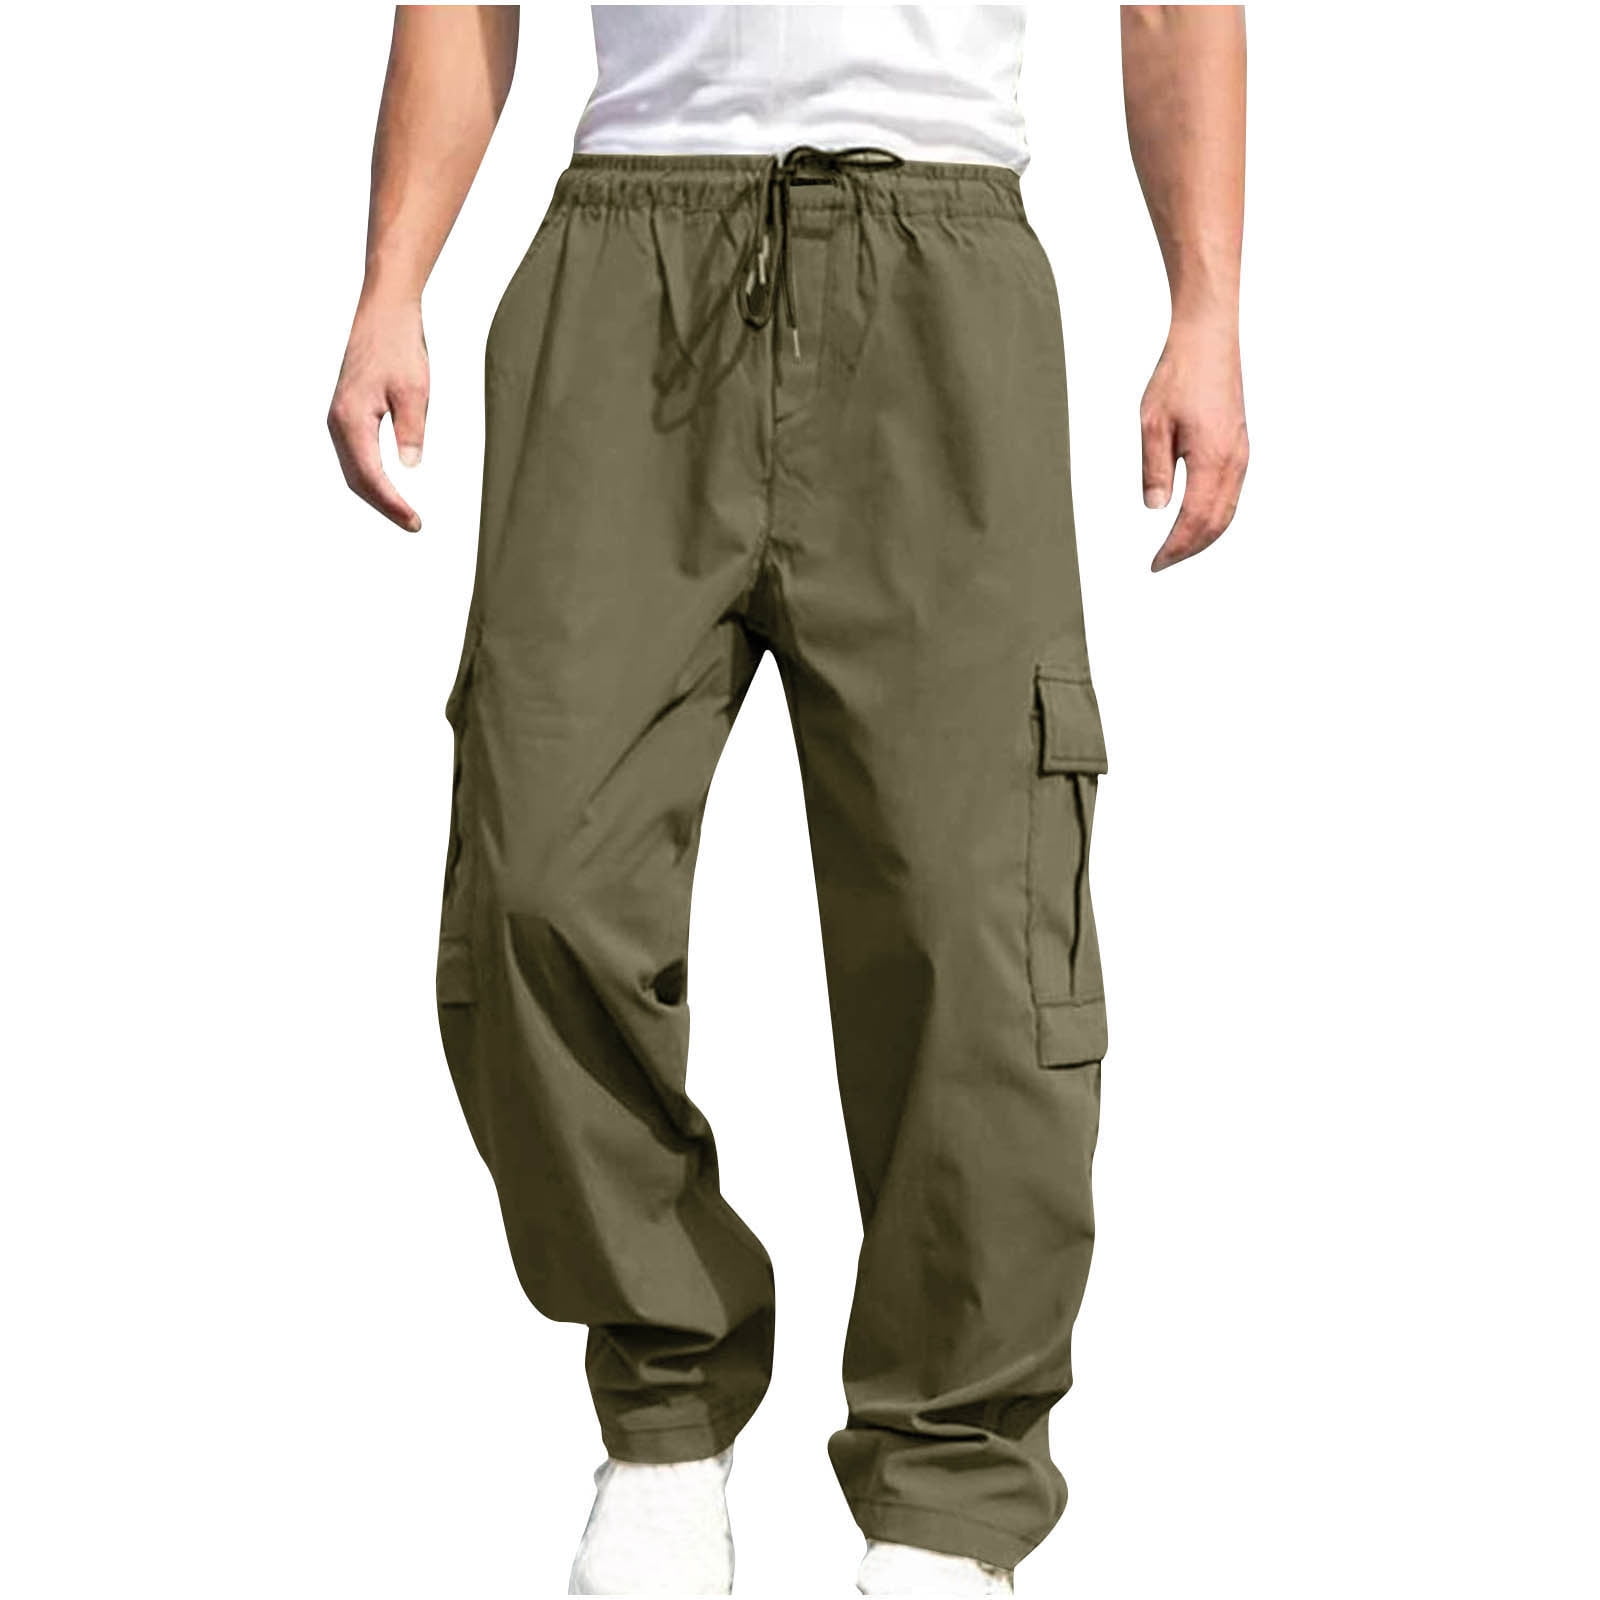 Kids Harem Trousers 2023: Casual Long Cotton Pants For Boys And Girls Loose  Fit, All Match, Spring/Autumn From Sansejinba, $19.22 | DHgate.Com